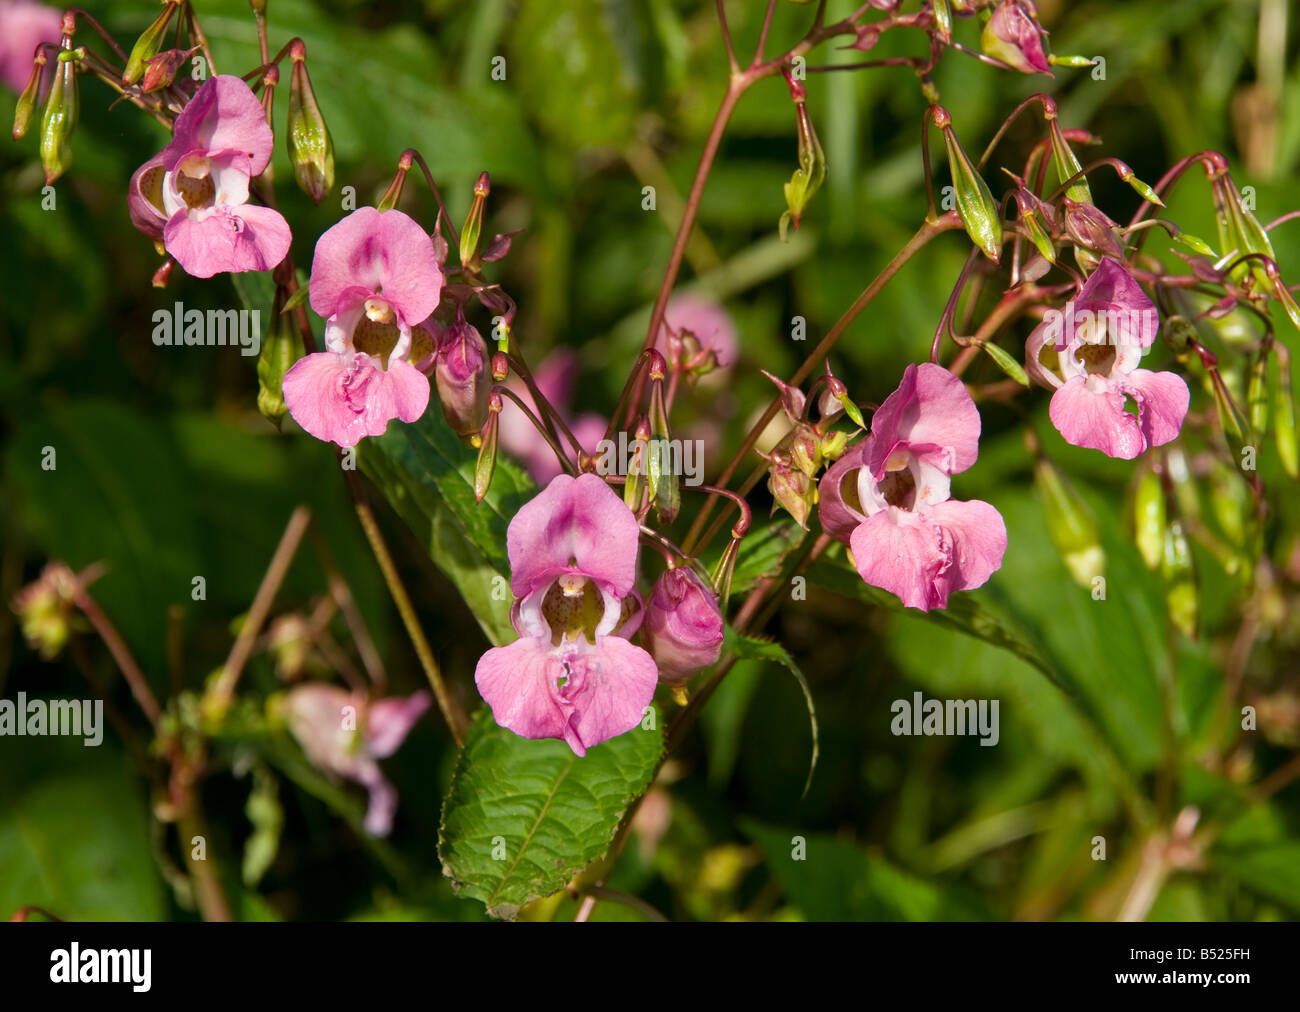 Flower heads of the invasive Himalayan Balsam plant growing on banks the River Tweed Stock Photo